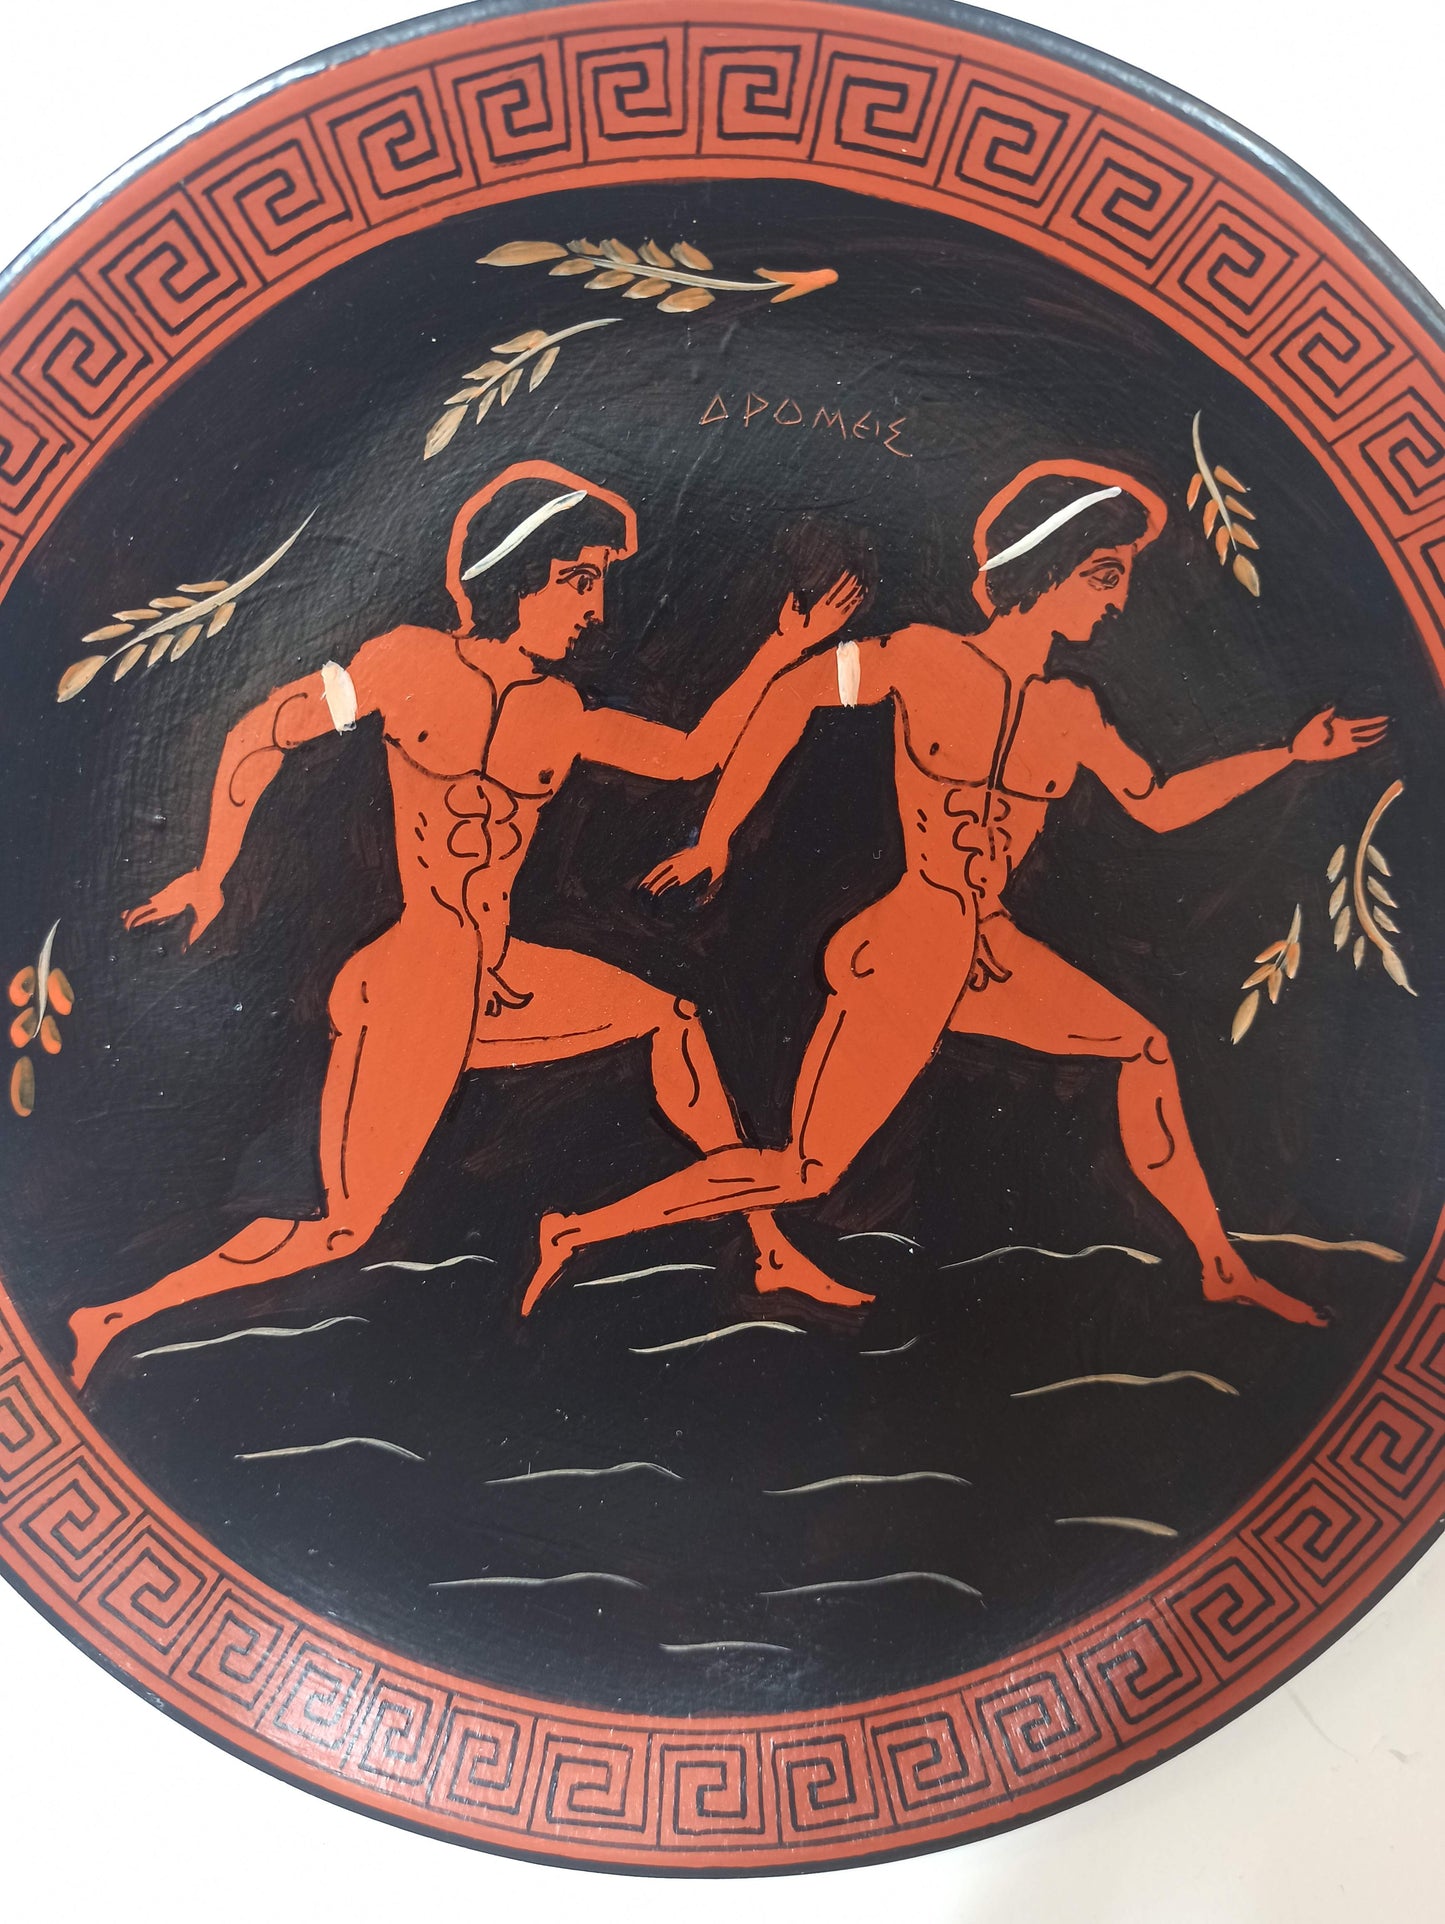 Runners - The oldest and most important Sport - Ancient Greek Olympic Games - Ceramic plate - Handmade in Greece